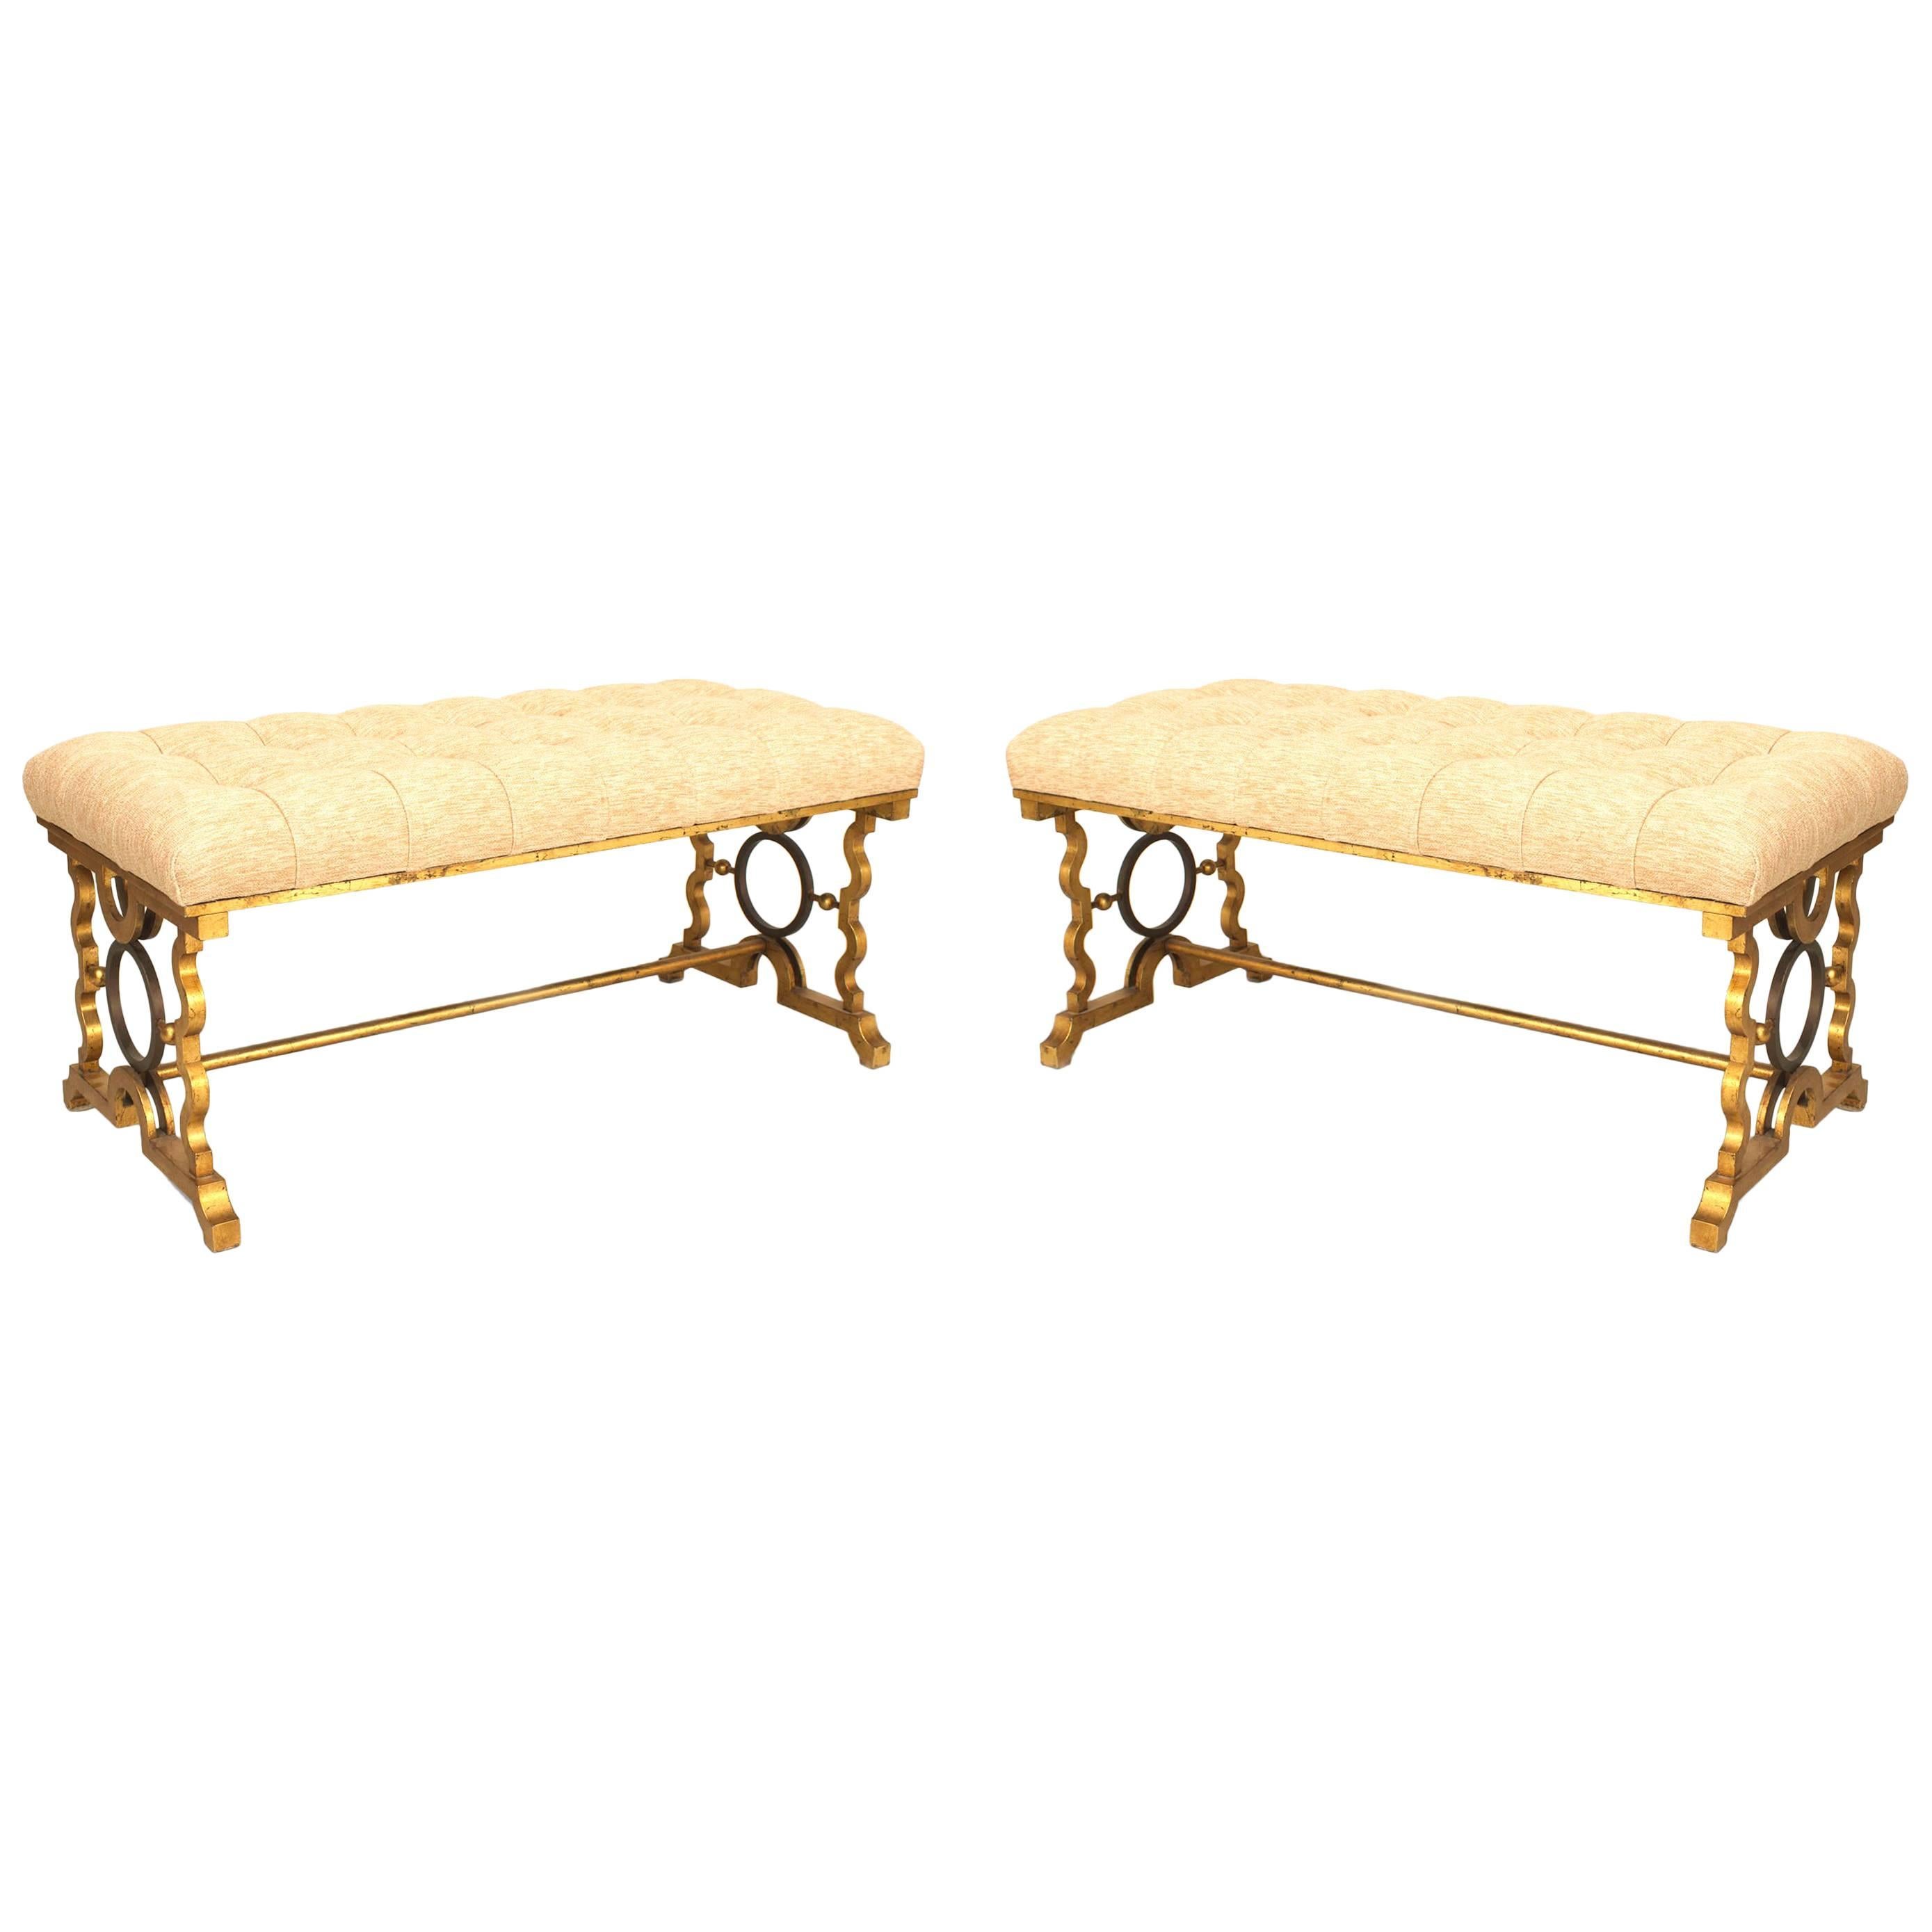 Pair of French Beige Suede Benches